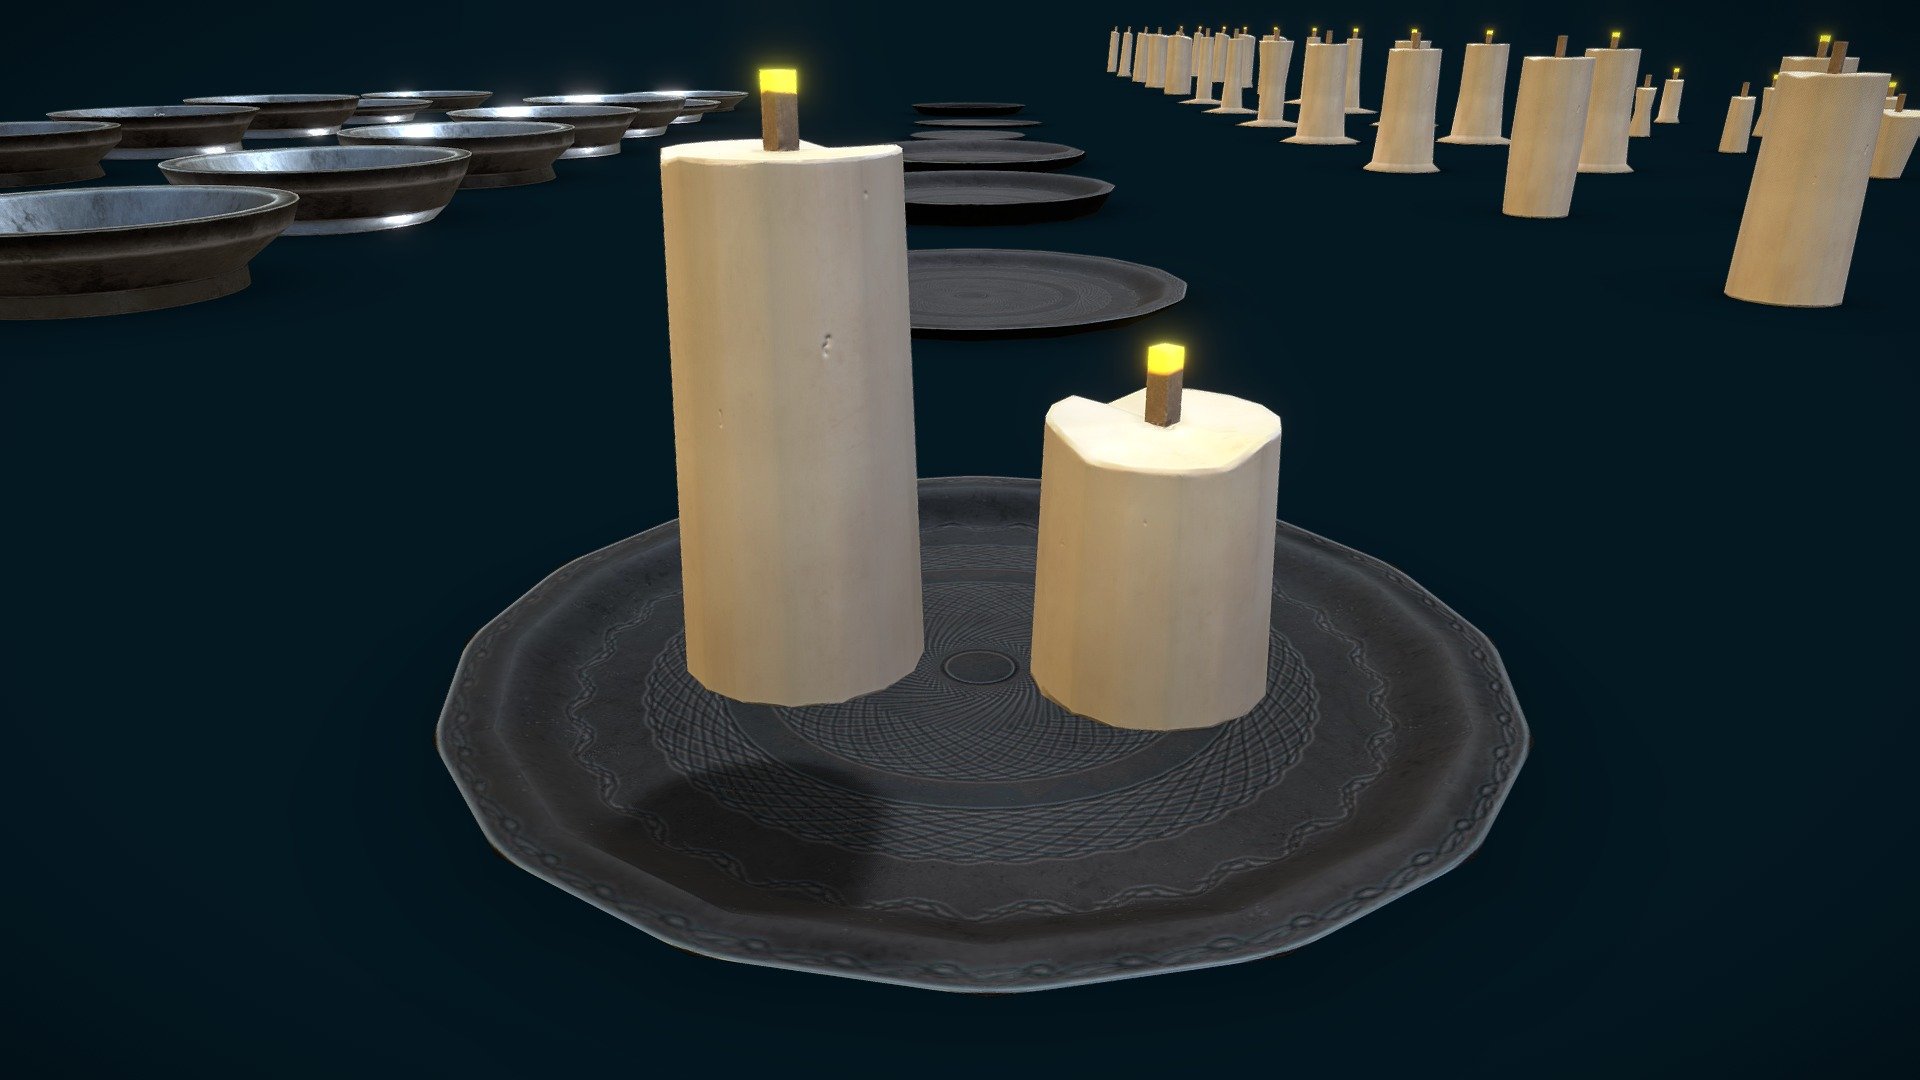 Stylized Candles Pack




2K Textures - PBR - [BaseColor, Metallic, Normal, Occlussion and Roughness] and Emissive for glow variations.

UV Unwrapped

FBX [Scene + Individual Exports at origin 0, 0, 0]

Blend File Included [Scene + Individual Exports at origin 0, 0, 0]

Note, candles are slightly modified for both topology and textures. Original textures included.

This is an individual extract from my big Unreal Engine 4 Stylized PBR Dungeon Pack V2. Available too on CGTrader, Unreal Engine 4 Marketplace and the ArtStation Store.

Check more info about the entire pack here if you are interested: https://www.artstation.com/artwork/Po9PJo

Entire Asset Pack for UE4 [4.26.0] + FBX + Blend Files available in the in the ArtStation Store too: https://artstn.co/m/wwMv7

Unreal Engine Marketplace Stylized Dungeon Pack Page. [Buy this if you want the Unreal version only]: https://www.unrealengine.com/marketplace/en-US/product/stylized-pbr-dungeon-pack-jfg - Stylized PBR Candles Pack - Buy Royalty Free 3D model by Jesus Fernandez Garcia (@jamyzgenius) 3d model